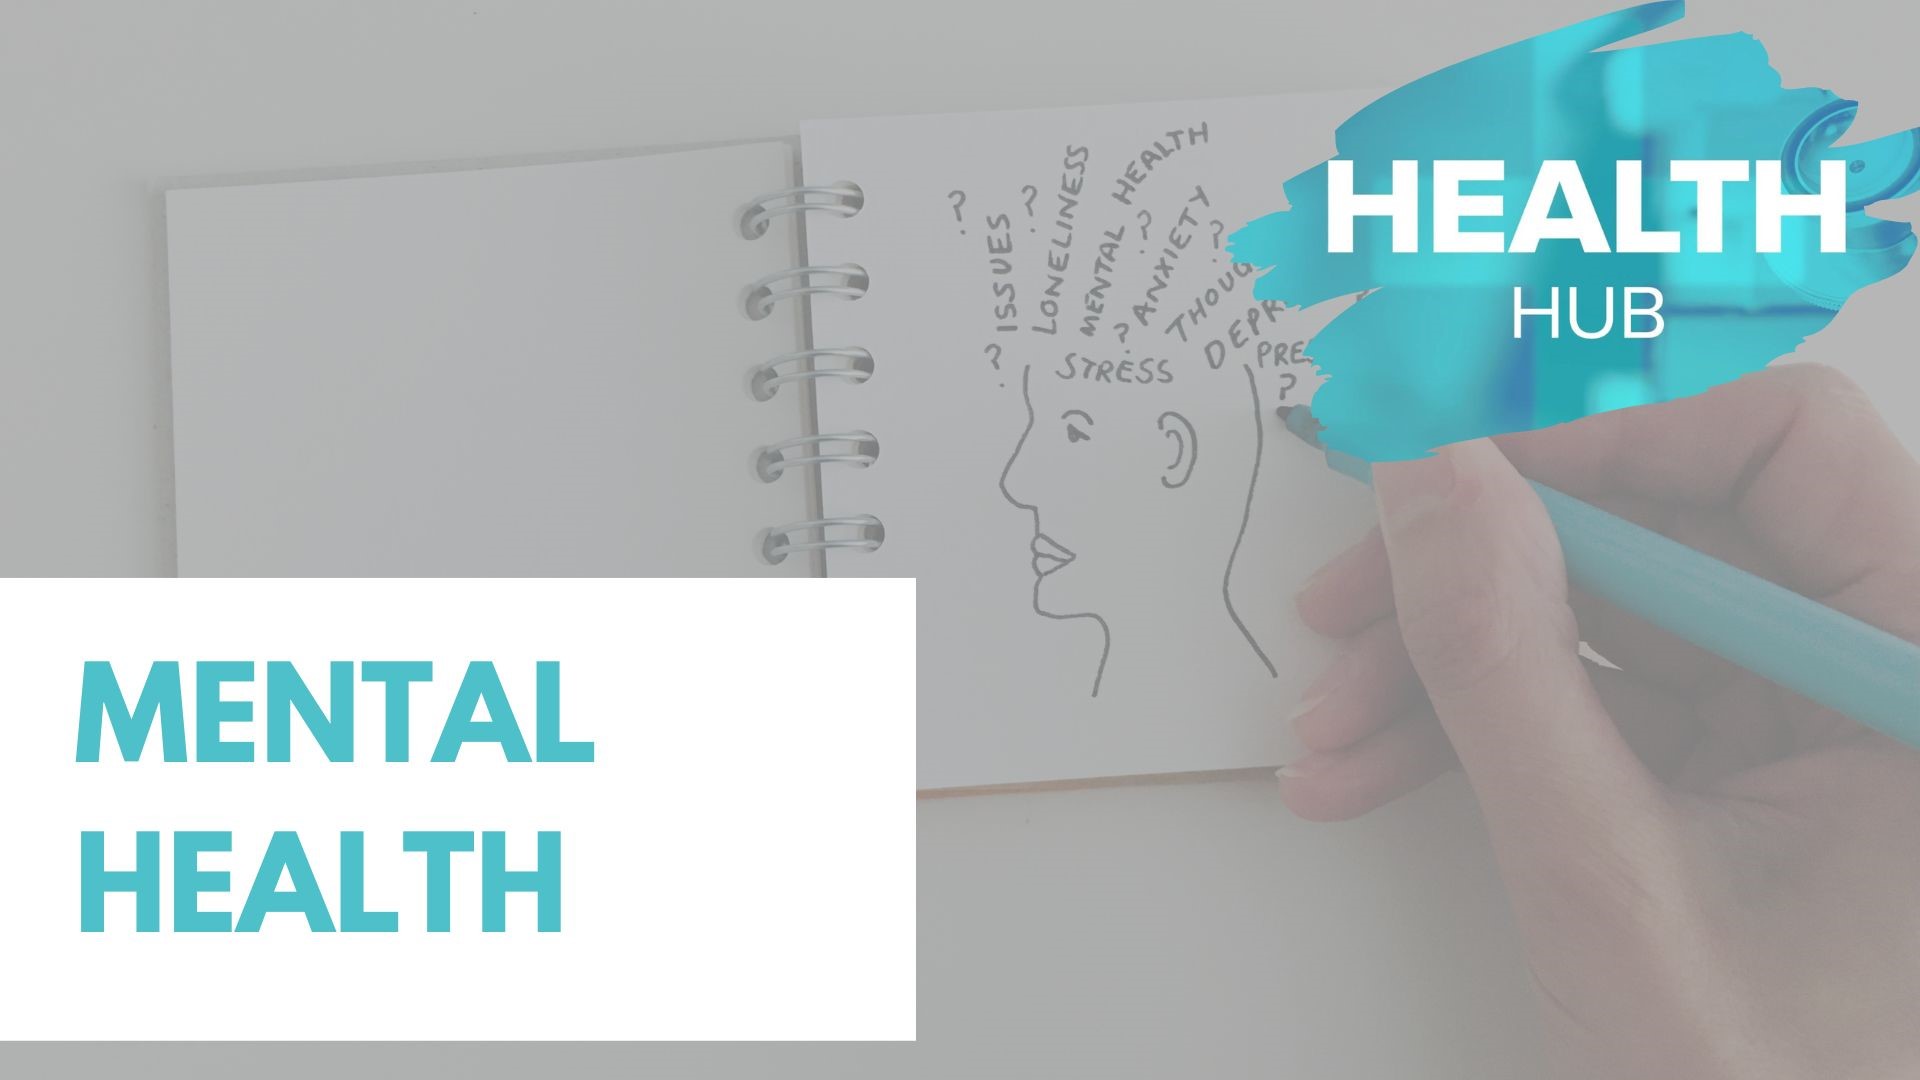 Shining a spotlight on mental health; how you can get help, learn to advocate for yourself and others, plus stories from those who've been there before.